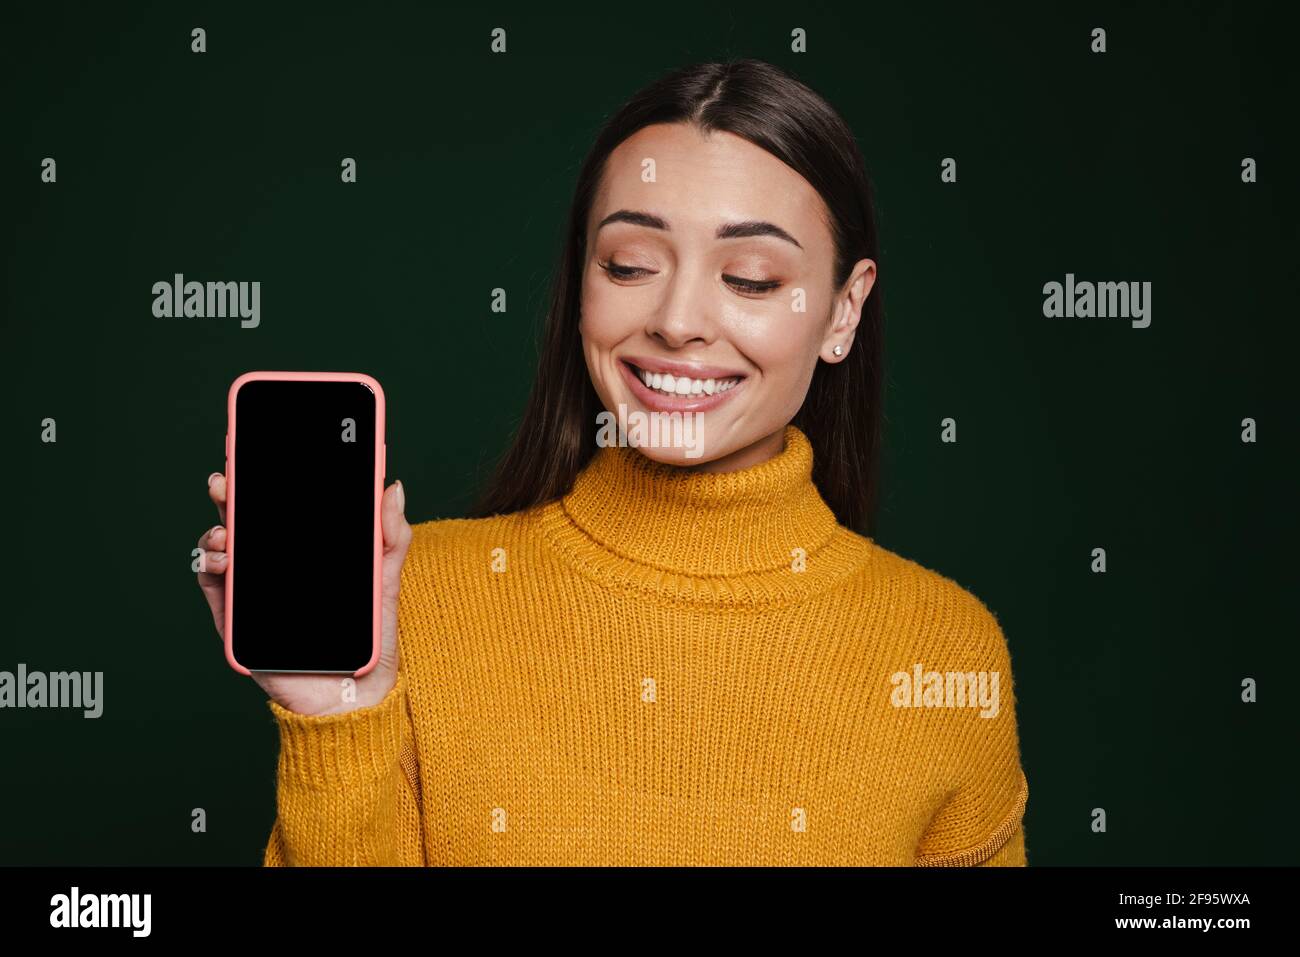 Joyful beautiful girl smiling and showing mobile phone isolated over green background Stock Photo